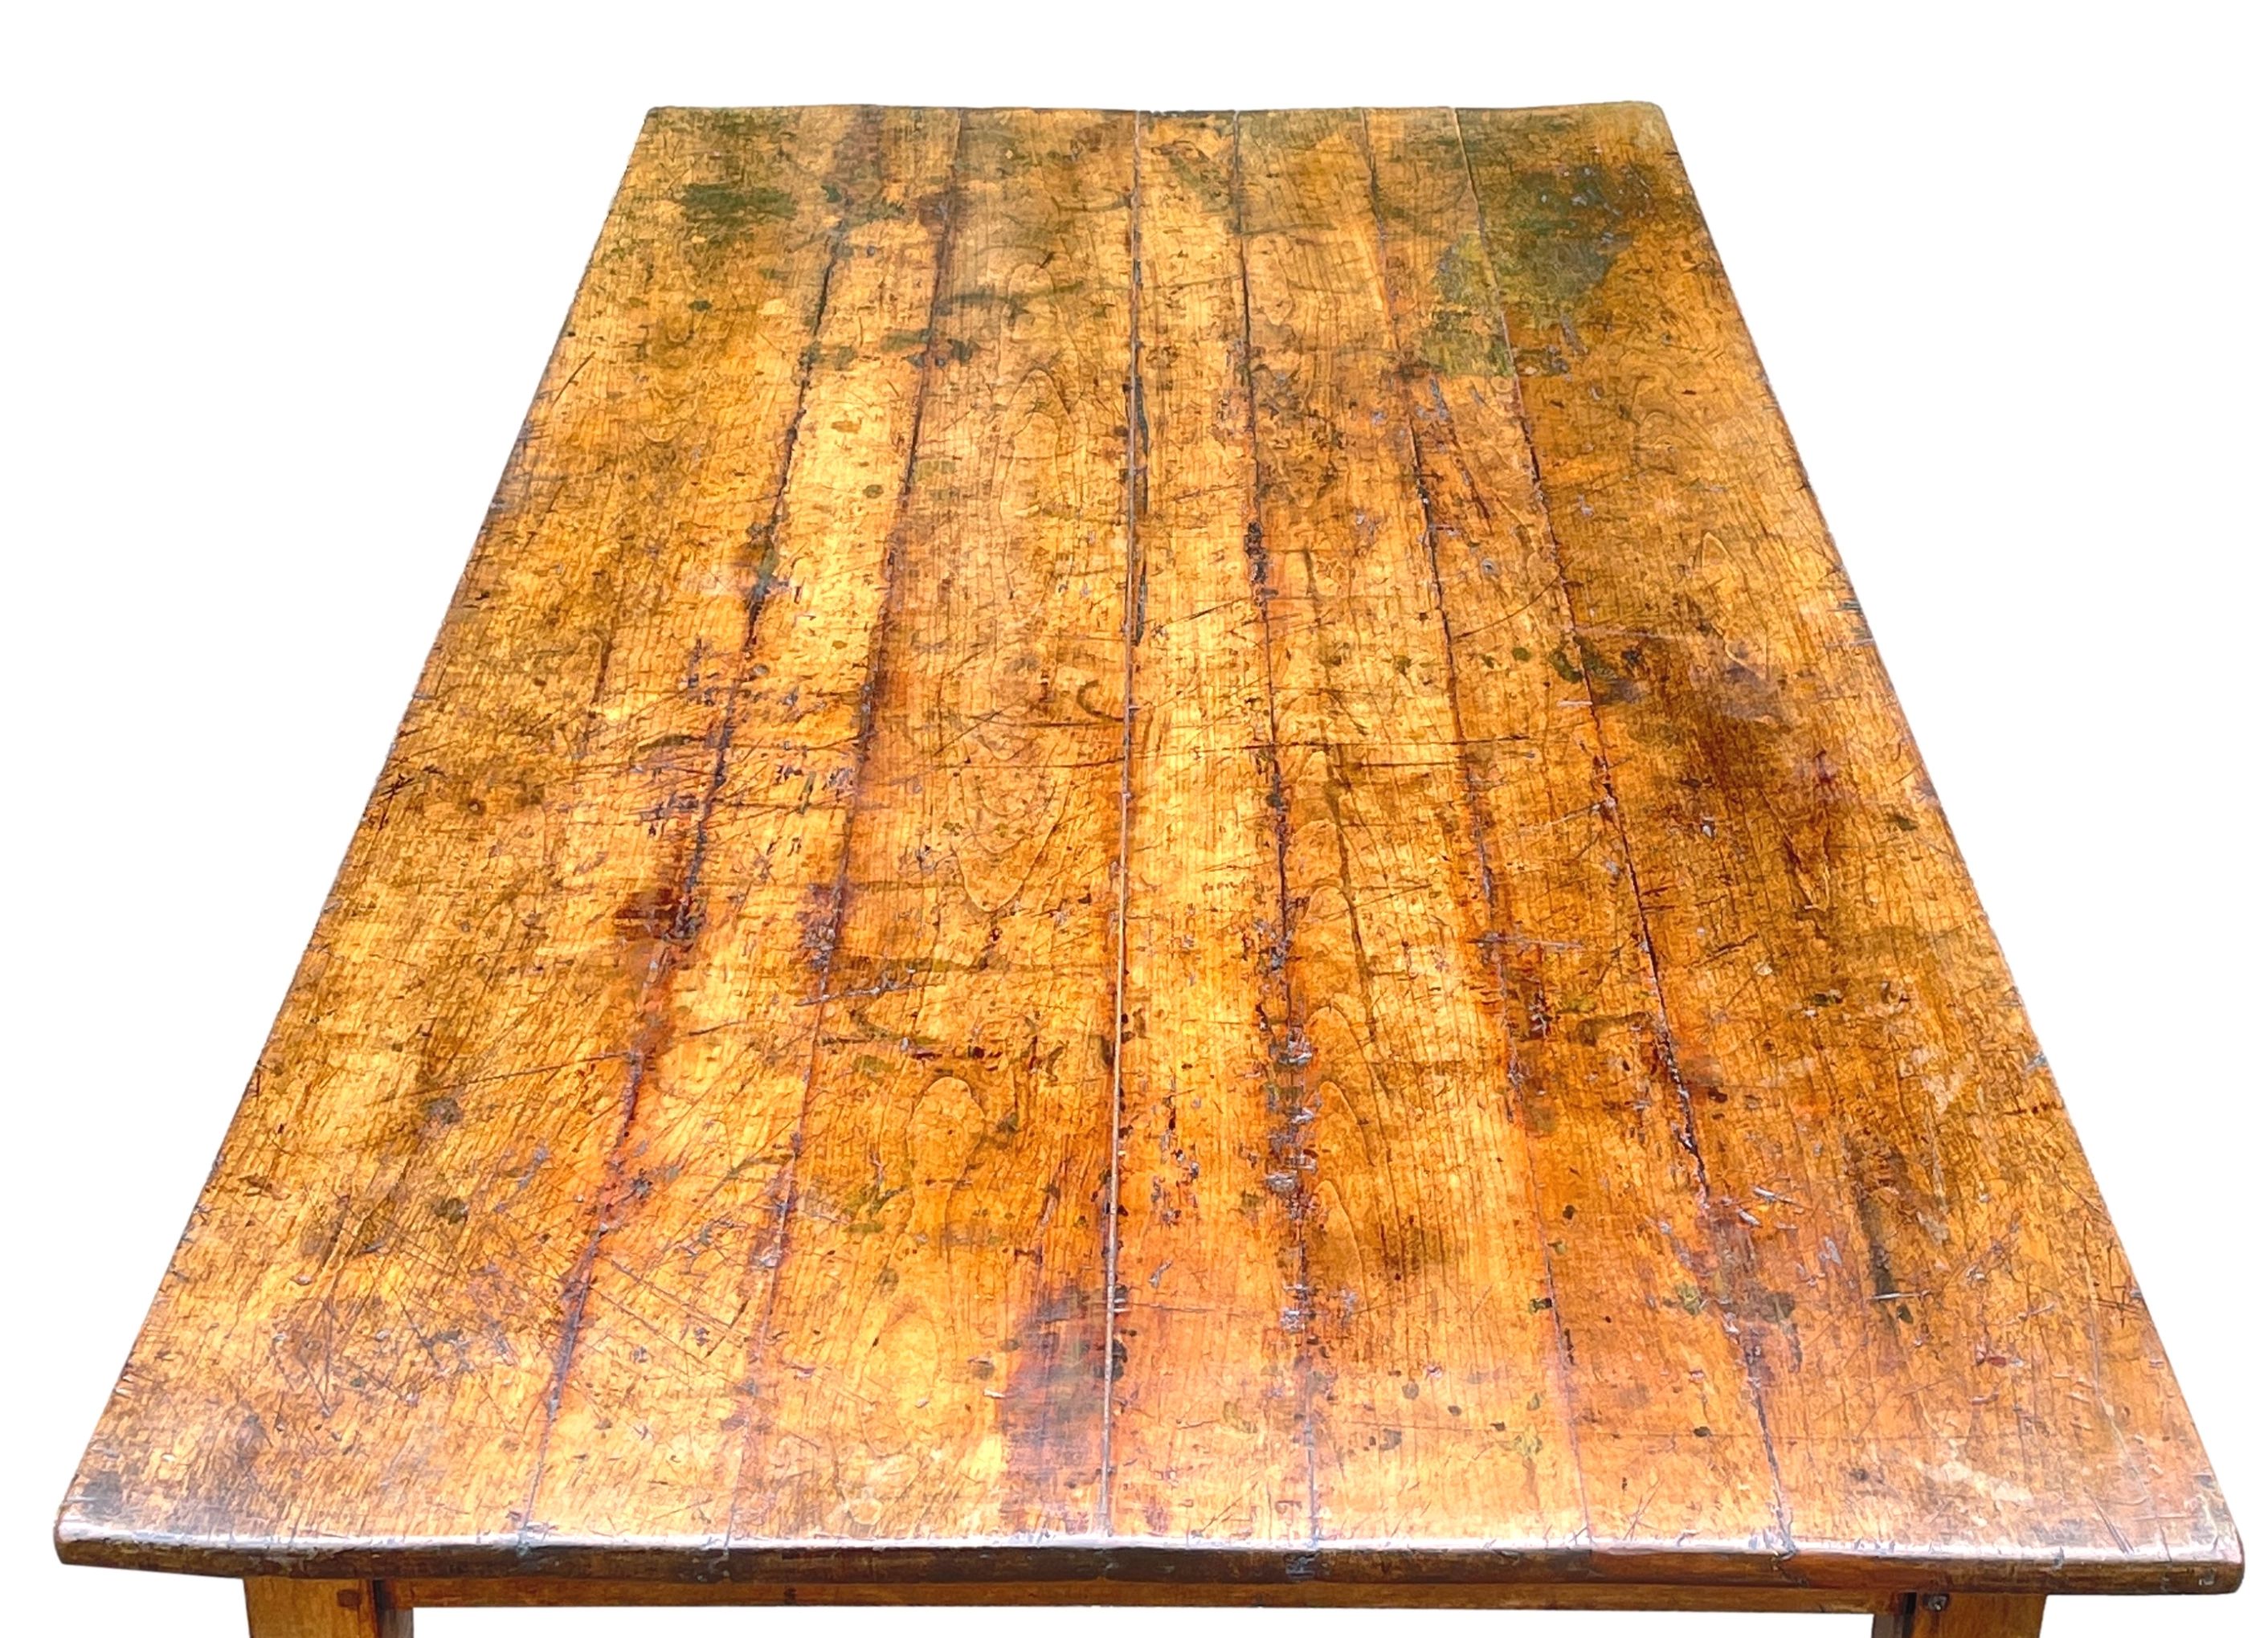 French 19th Century Farmhouse Dining Table